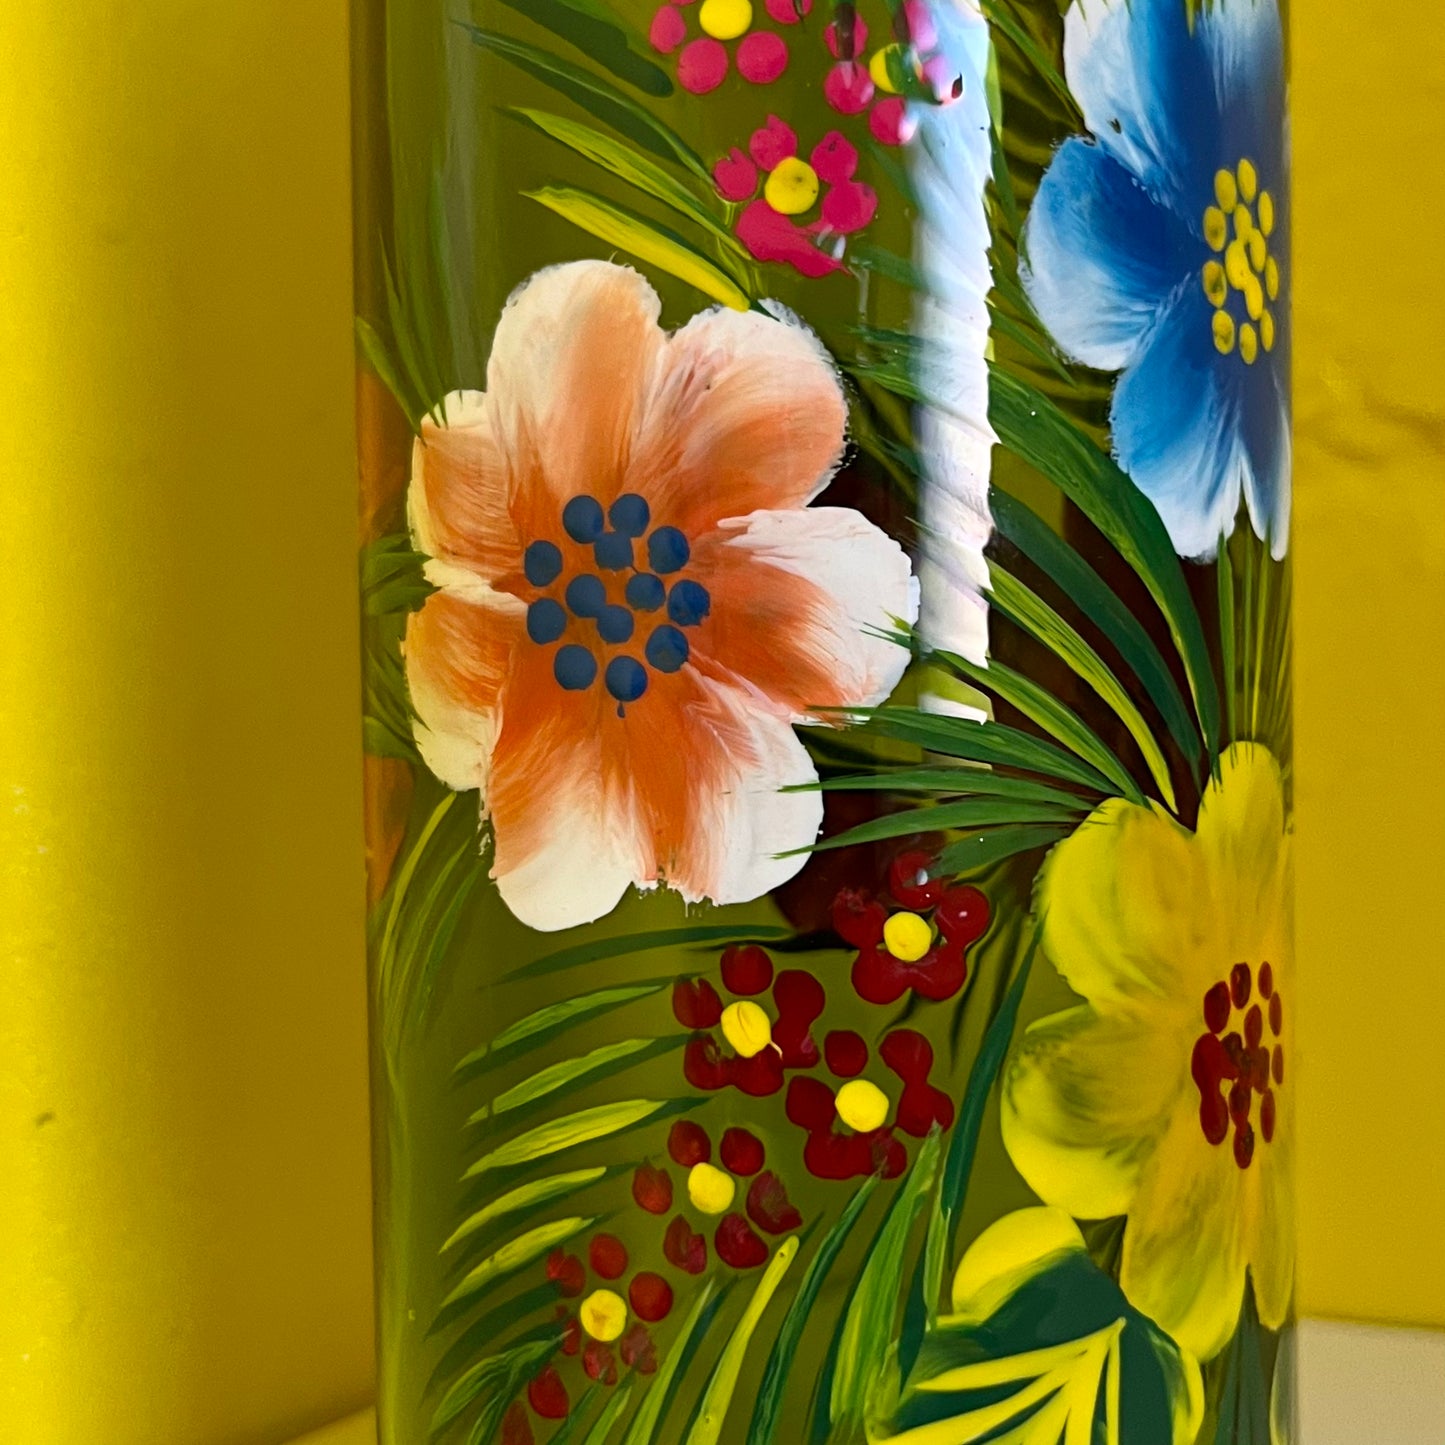 Maximiliano Vincente Hand Painted Glass Bottle